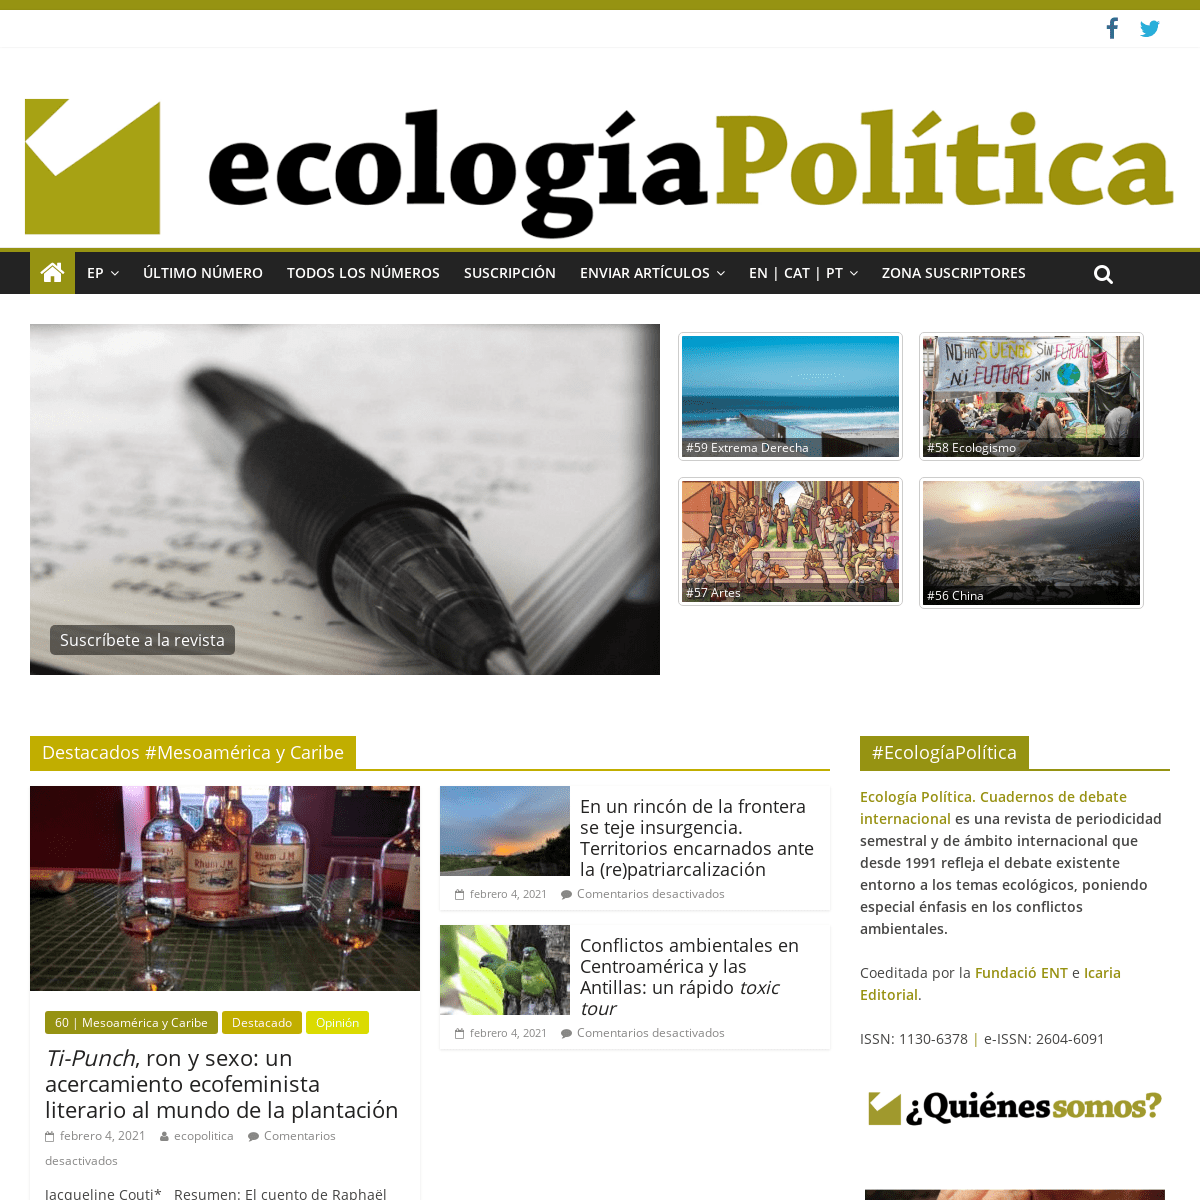 A complete backup of https://ecologiapolitica.info